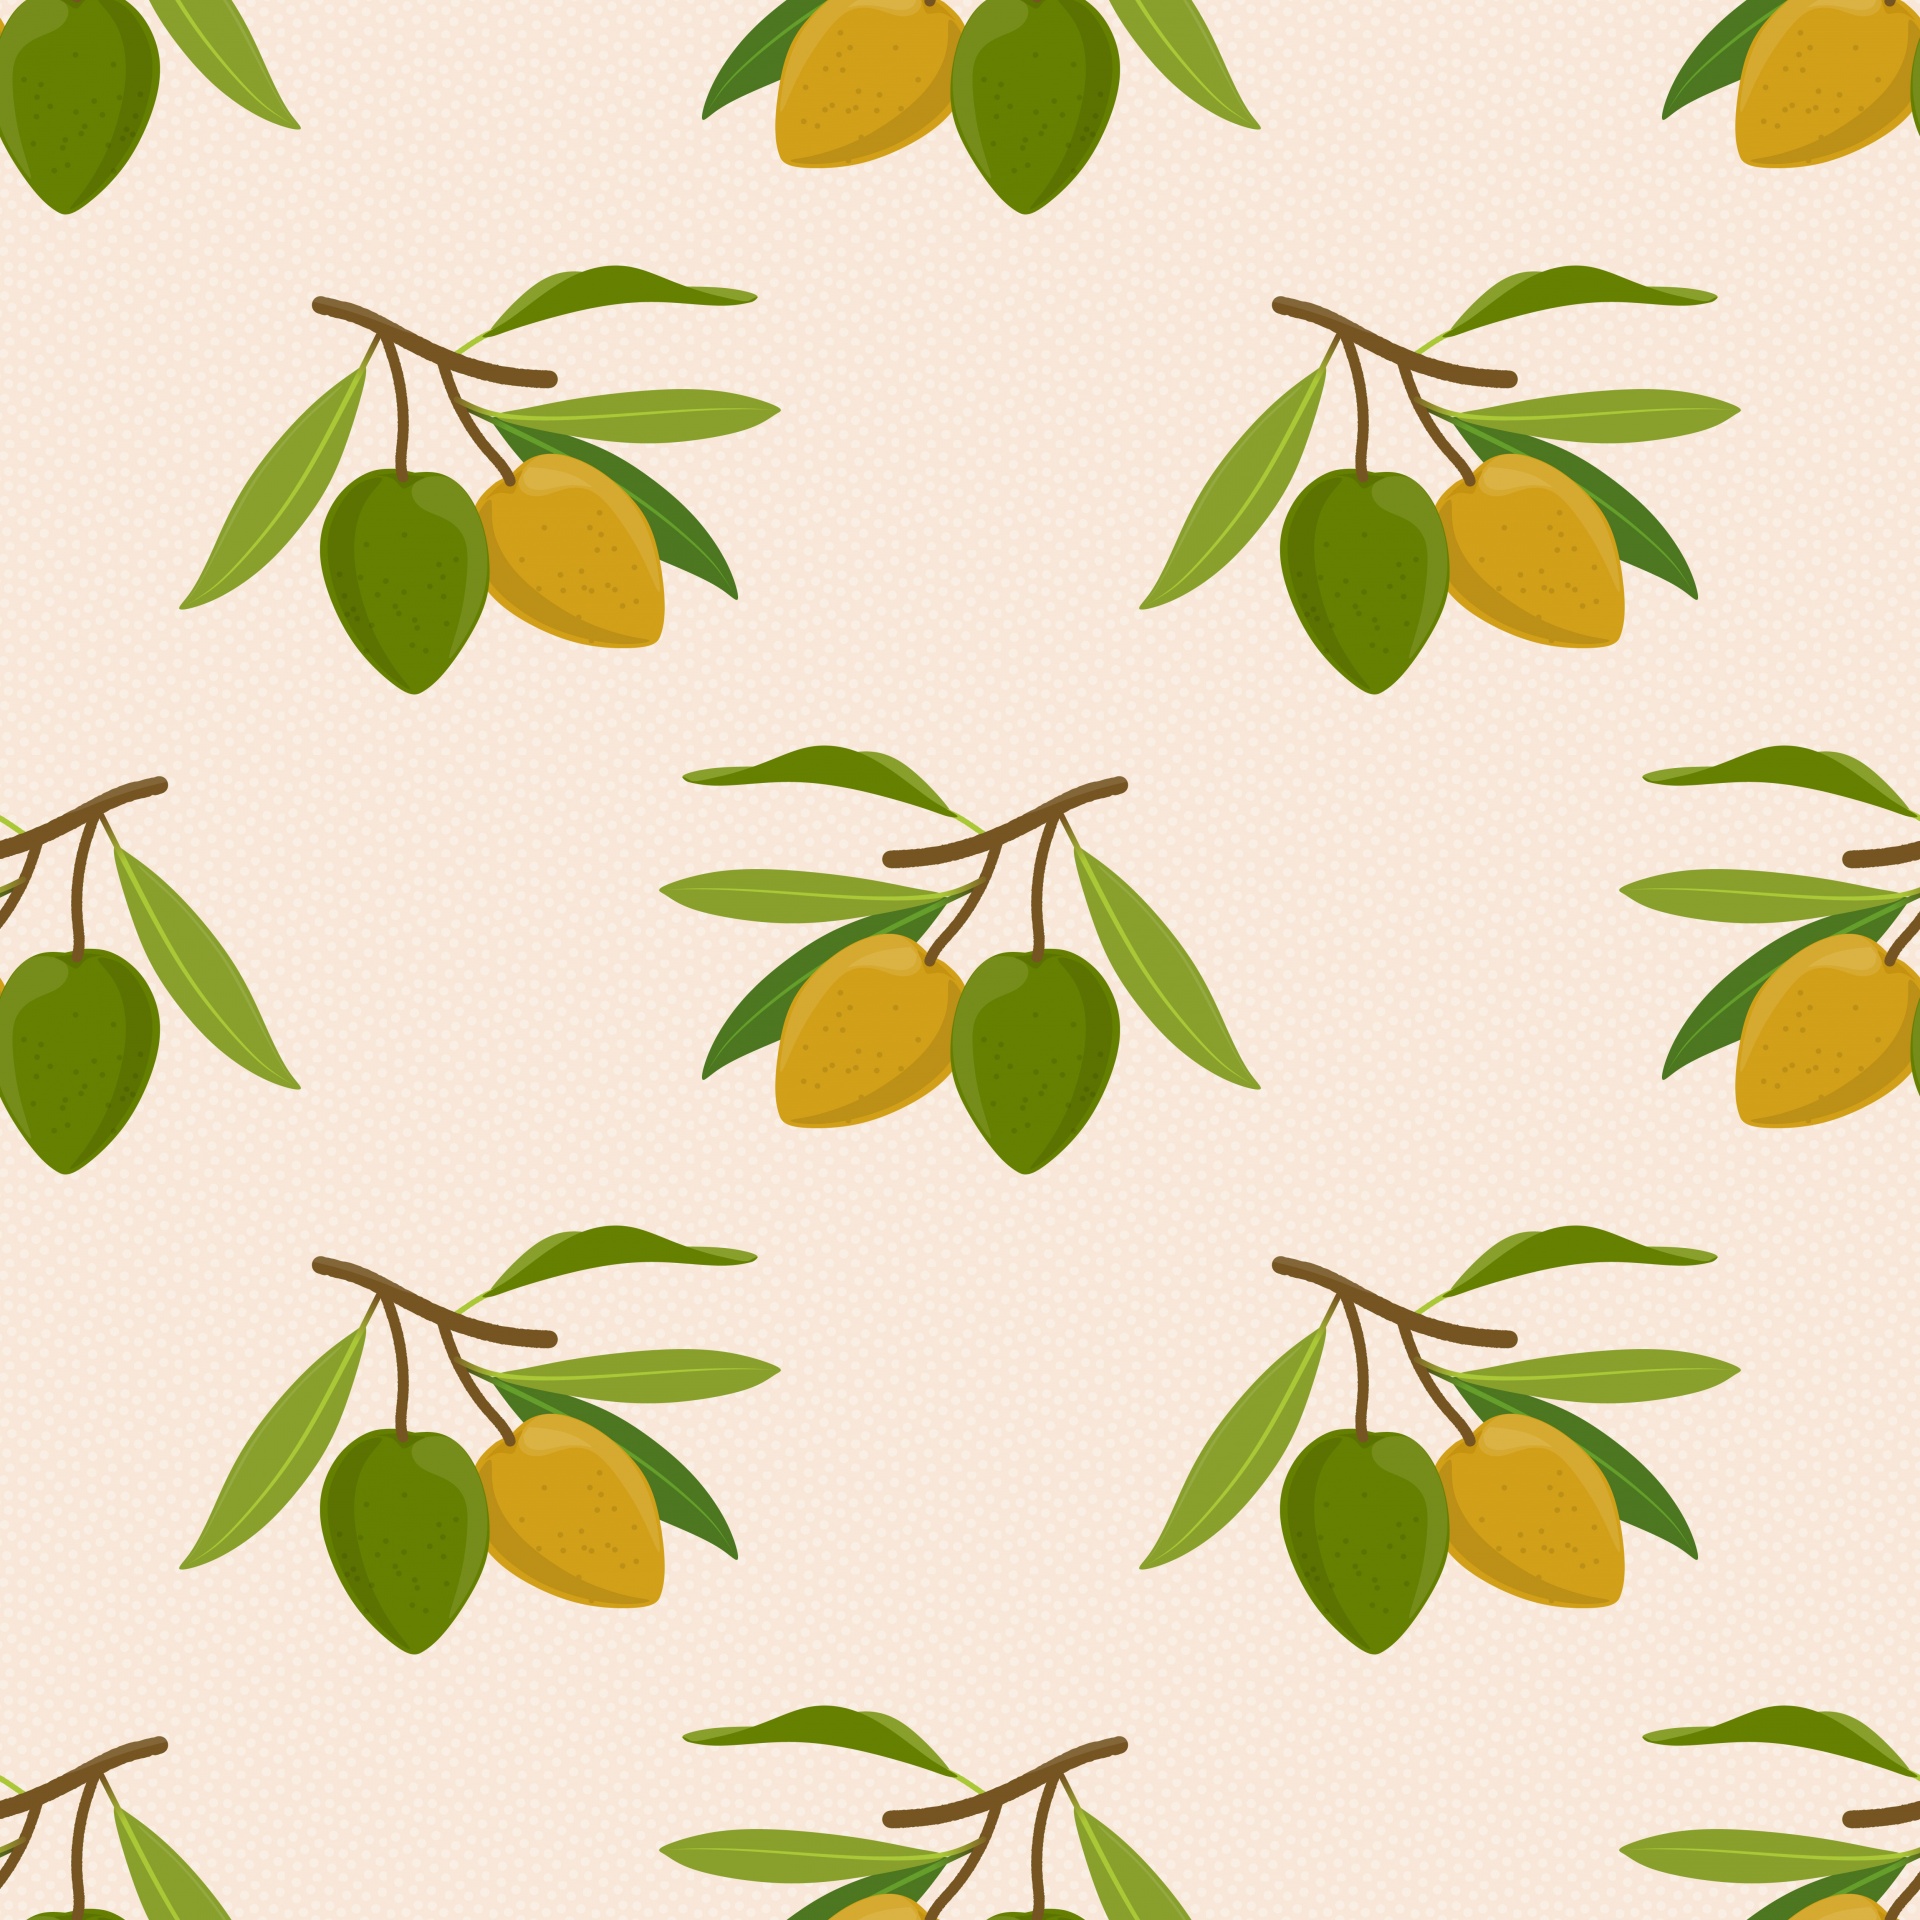 Green and yellow olives seamless pattern background on random dots, spots very light background